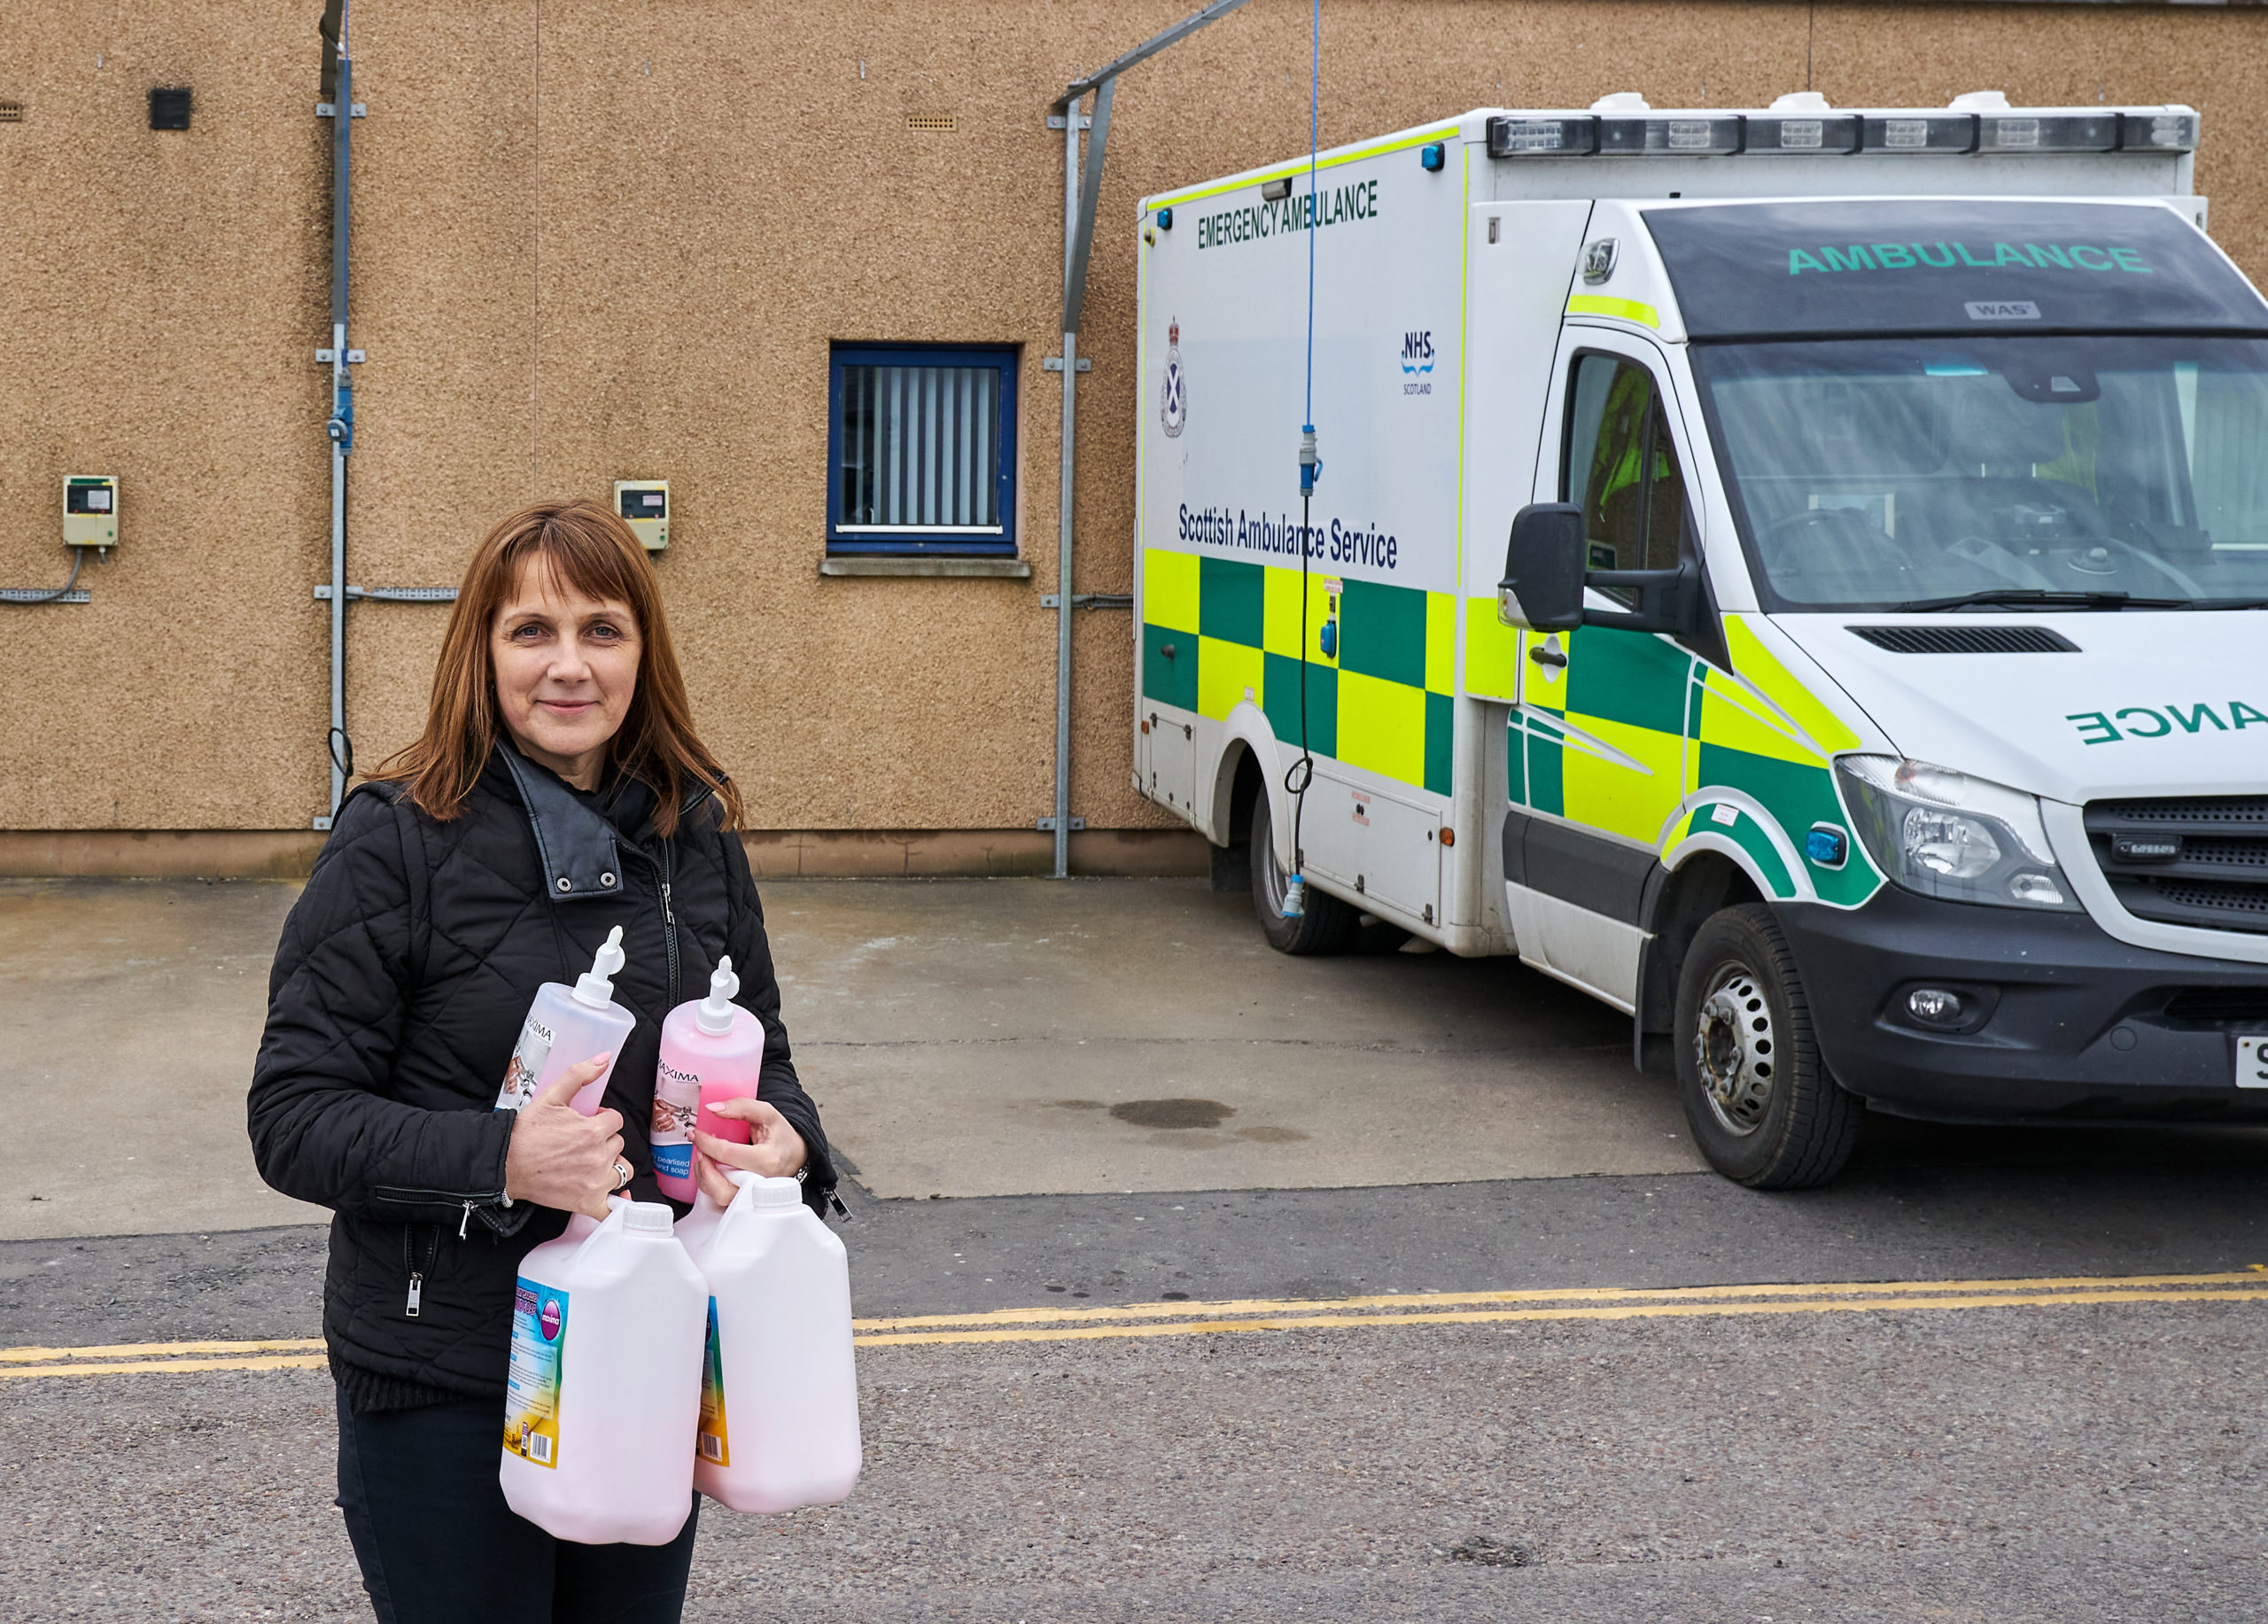 Irma Westwood, Deputy Head of Bishopmill Primary School, Elgin delivering the supplies of soap and towels.